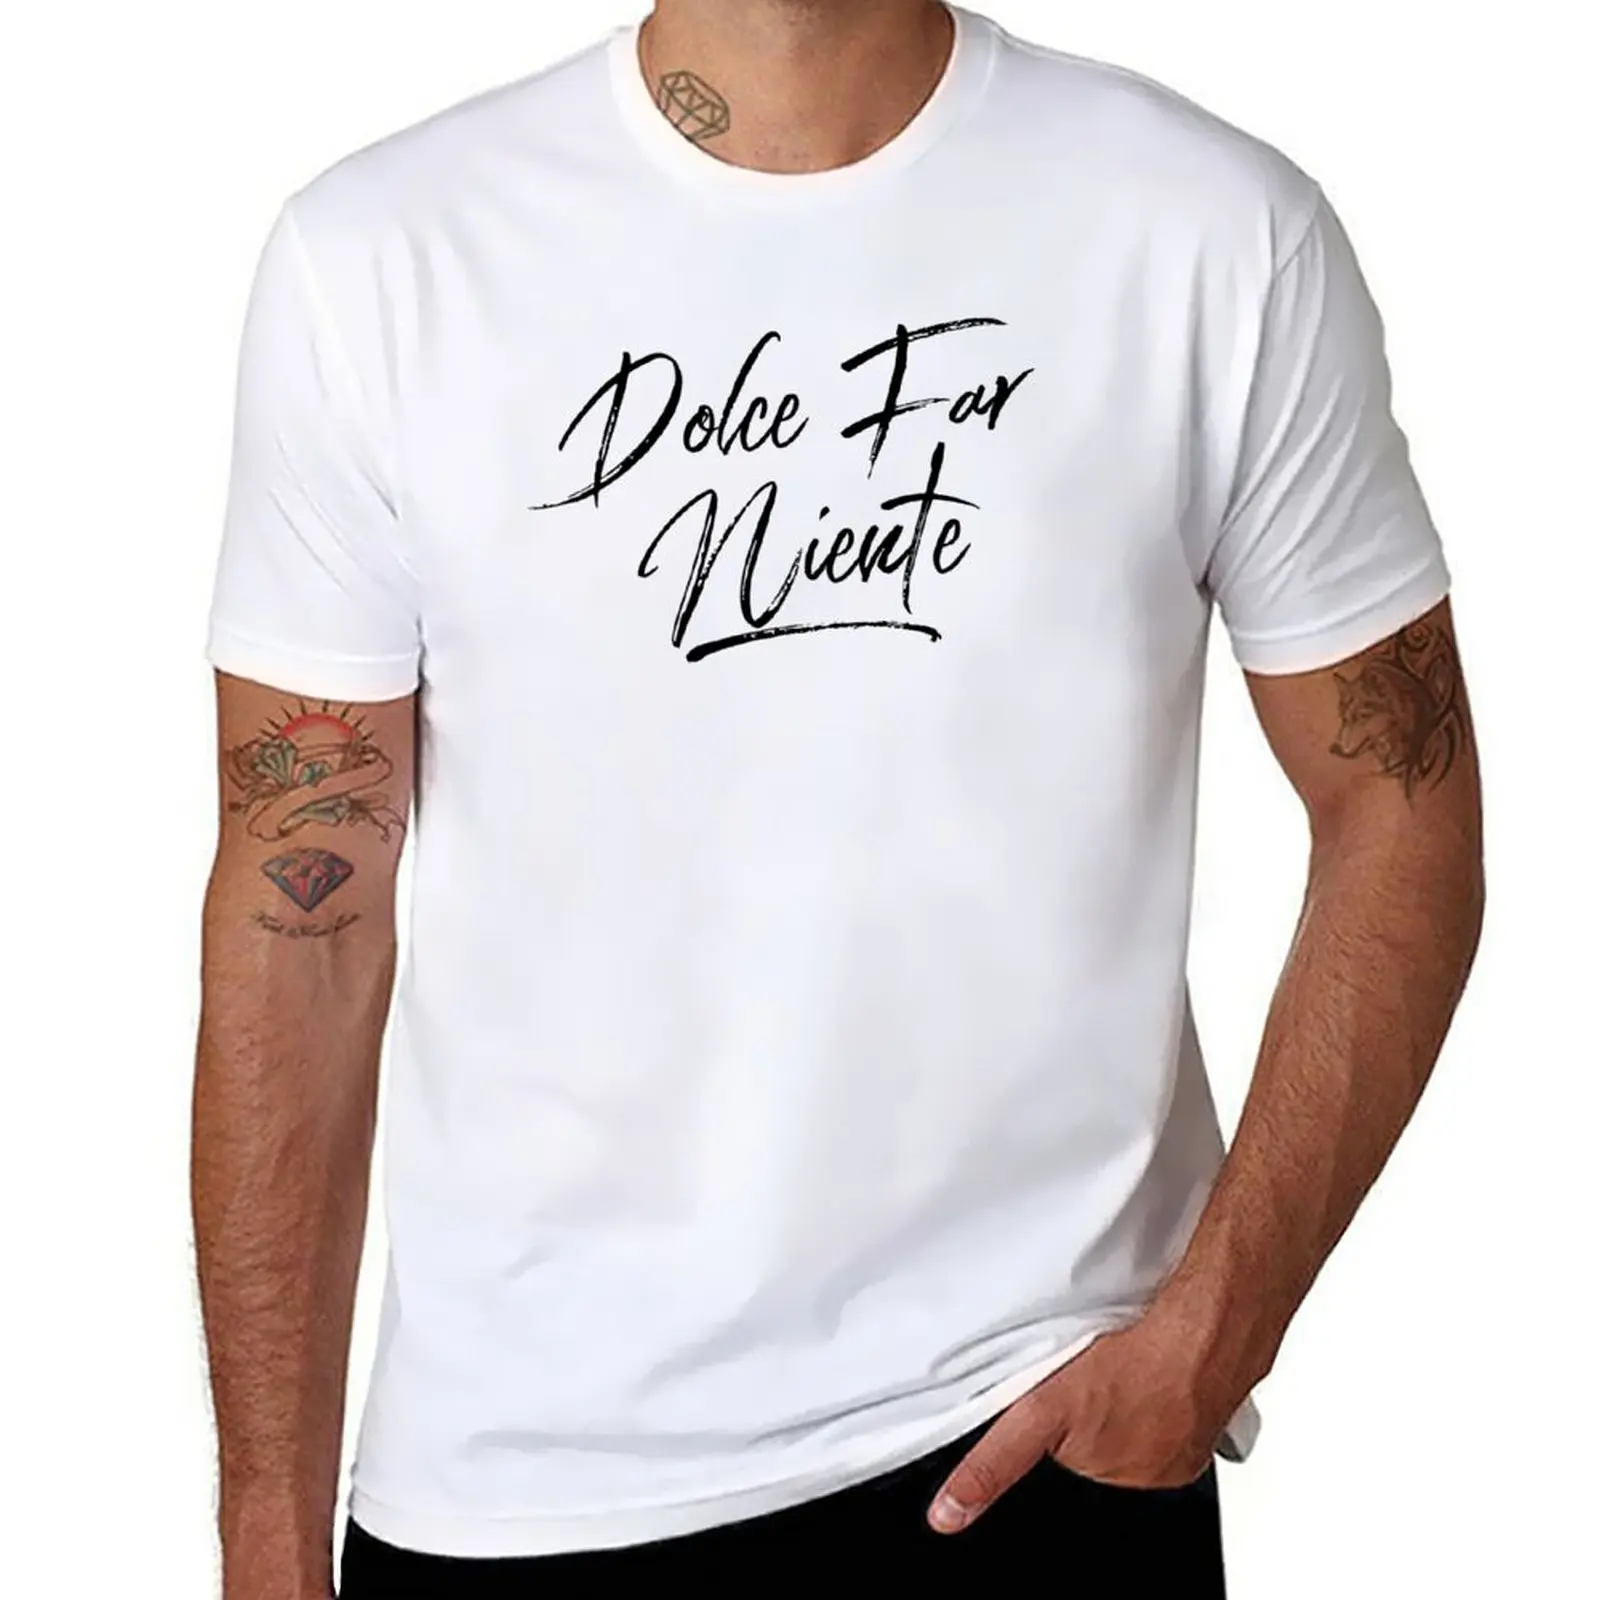 

New Dolce Far Niente (Sweet Doing Nothing) T-Shirt black t shirts plus size t shirts black t shirts for men